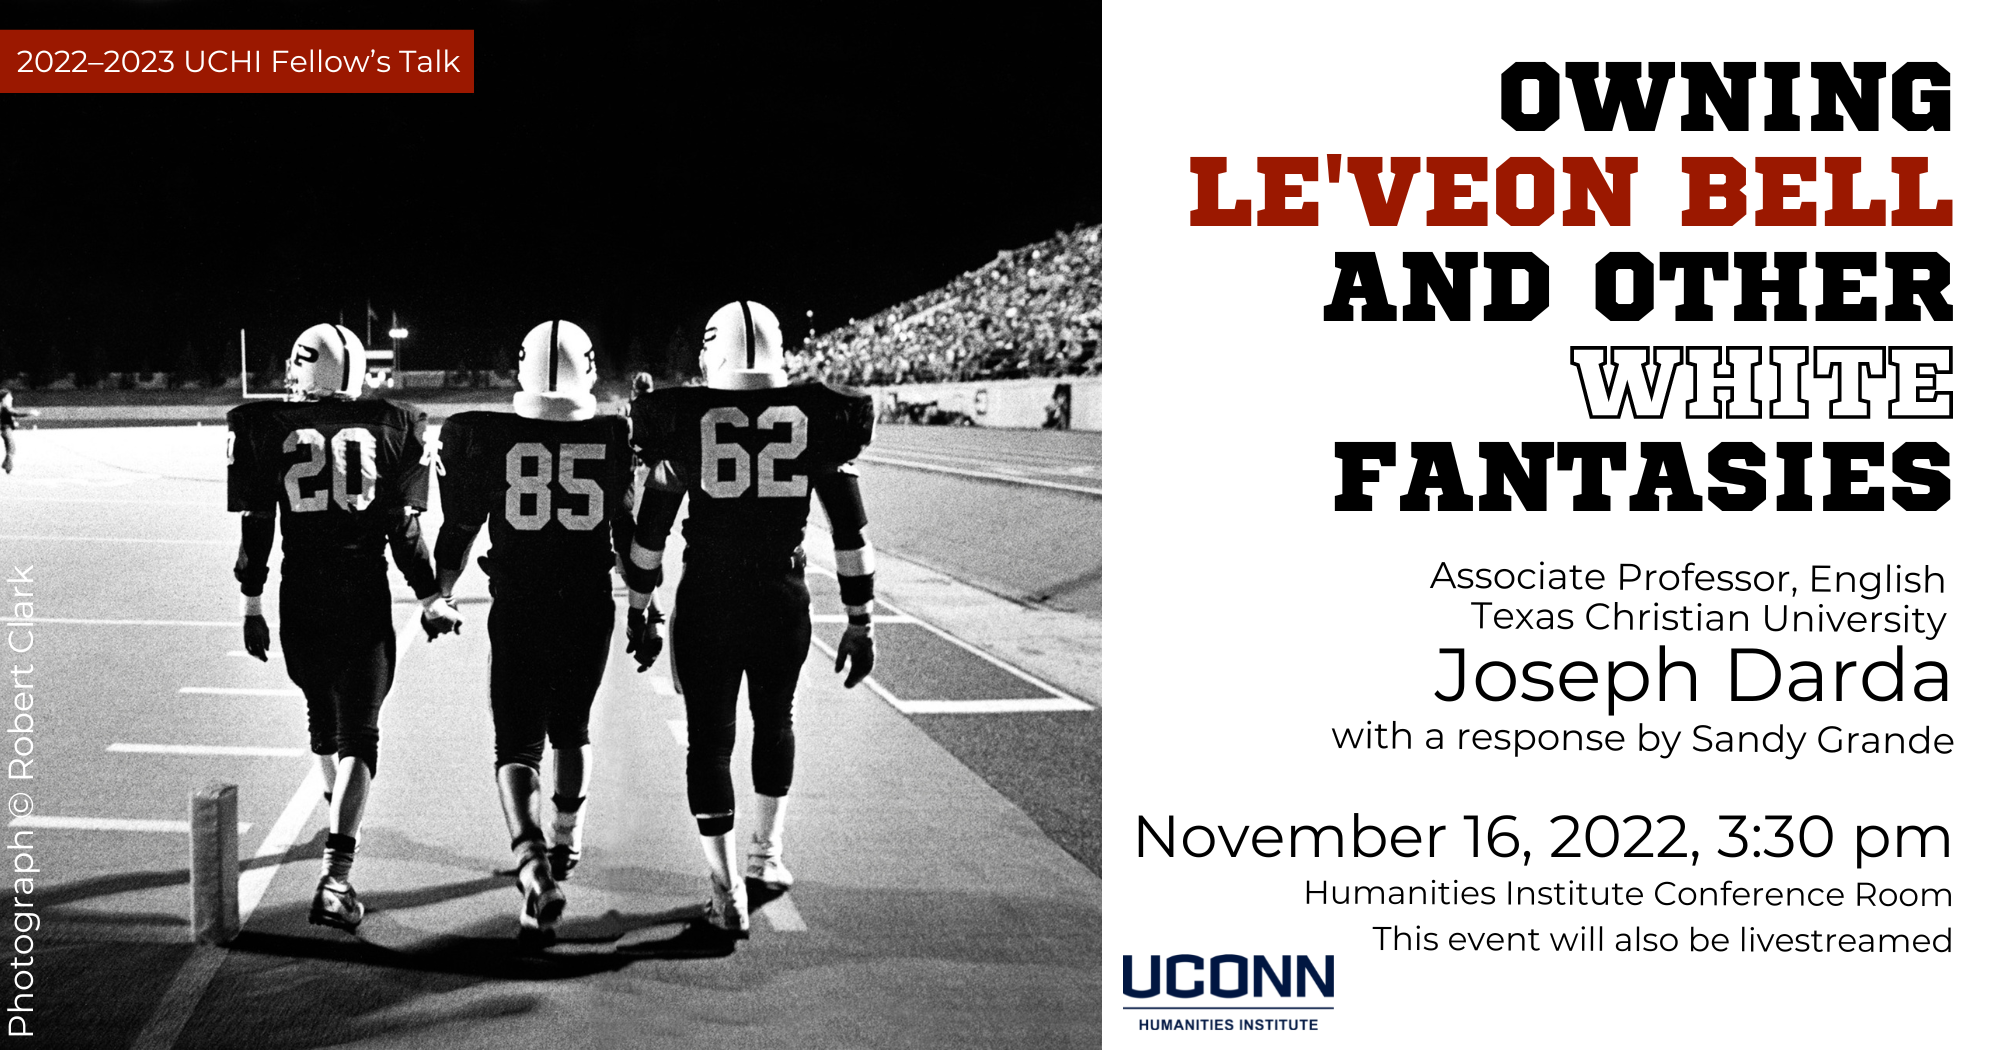 UCHI Fellow's Talk 2022–2023. Owning Le'veon Bell and other White Fantasies. Associate Professor of English, Texas Christian University, Joseph Darda, with a response by Sandy Grande. November 16, 2022, 3:30pm. UConn Humanities Institute Conference Room. This event will also be livestreamed.